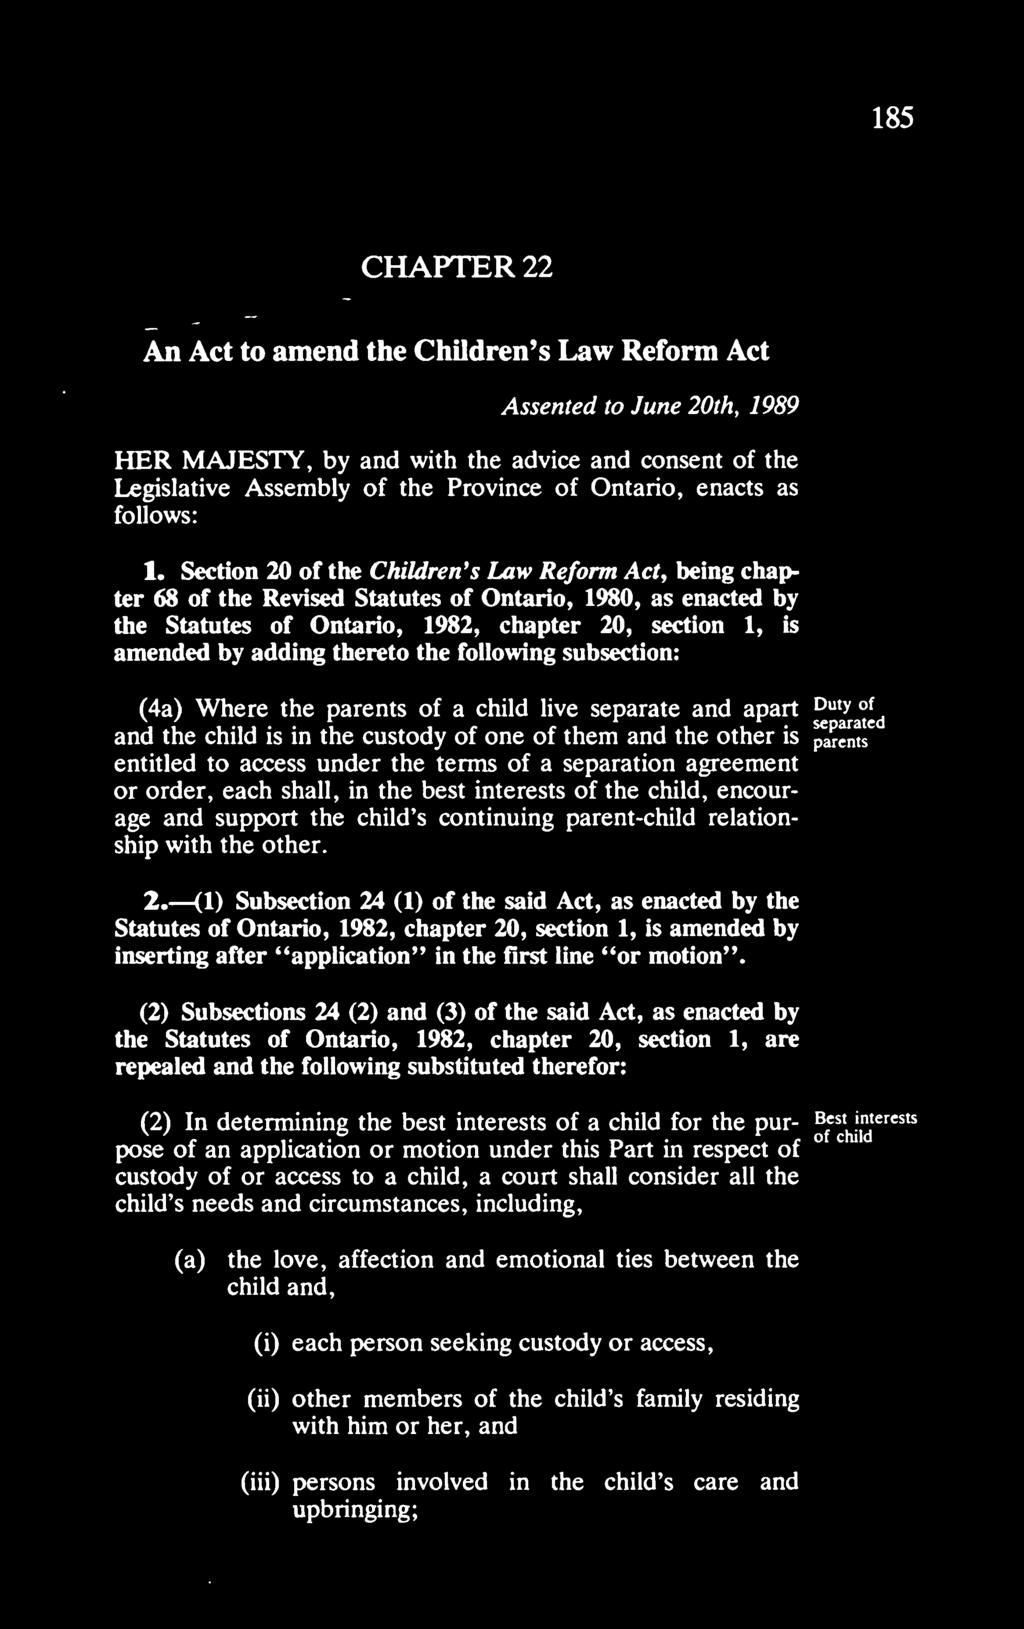 185 CHAPTER 22 An Act to amend the Children's Law Reform Act Assented to June 20th, 1989 HER MAJESTY, by and with the advice and consent of the Legislative Assembly of the Province of Ontario, enacts